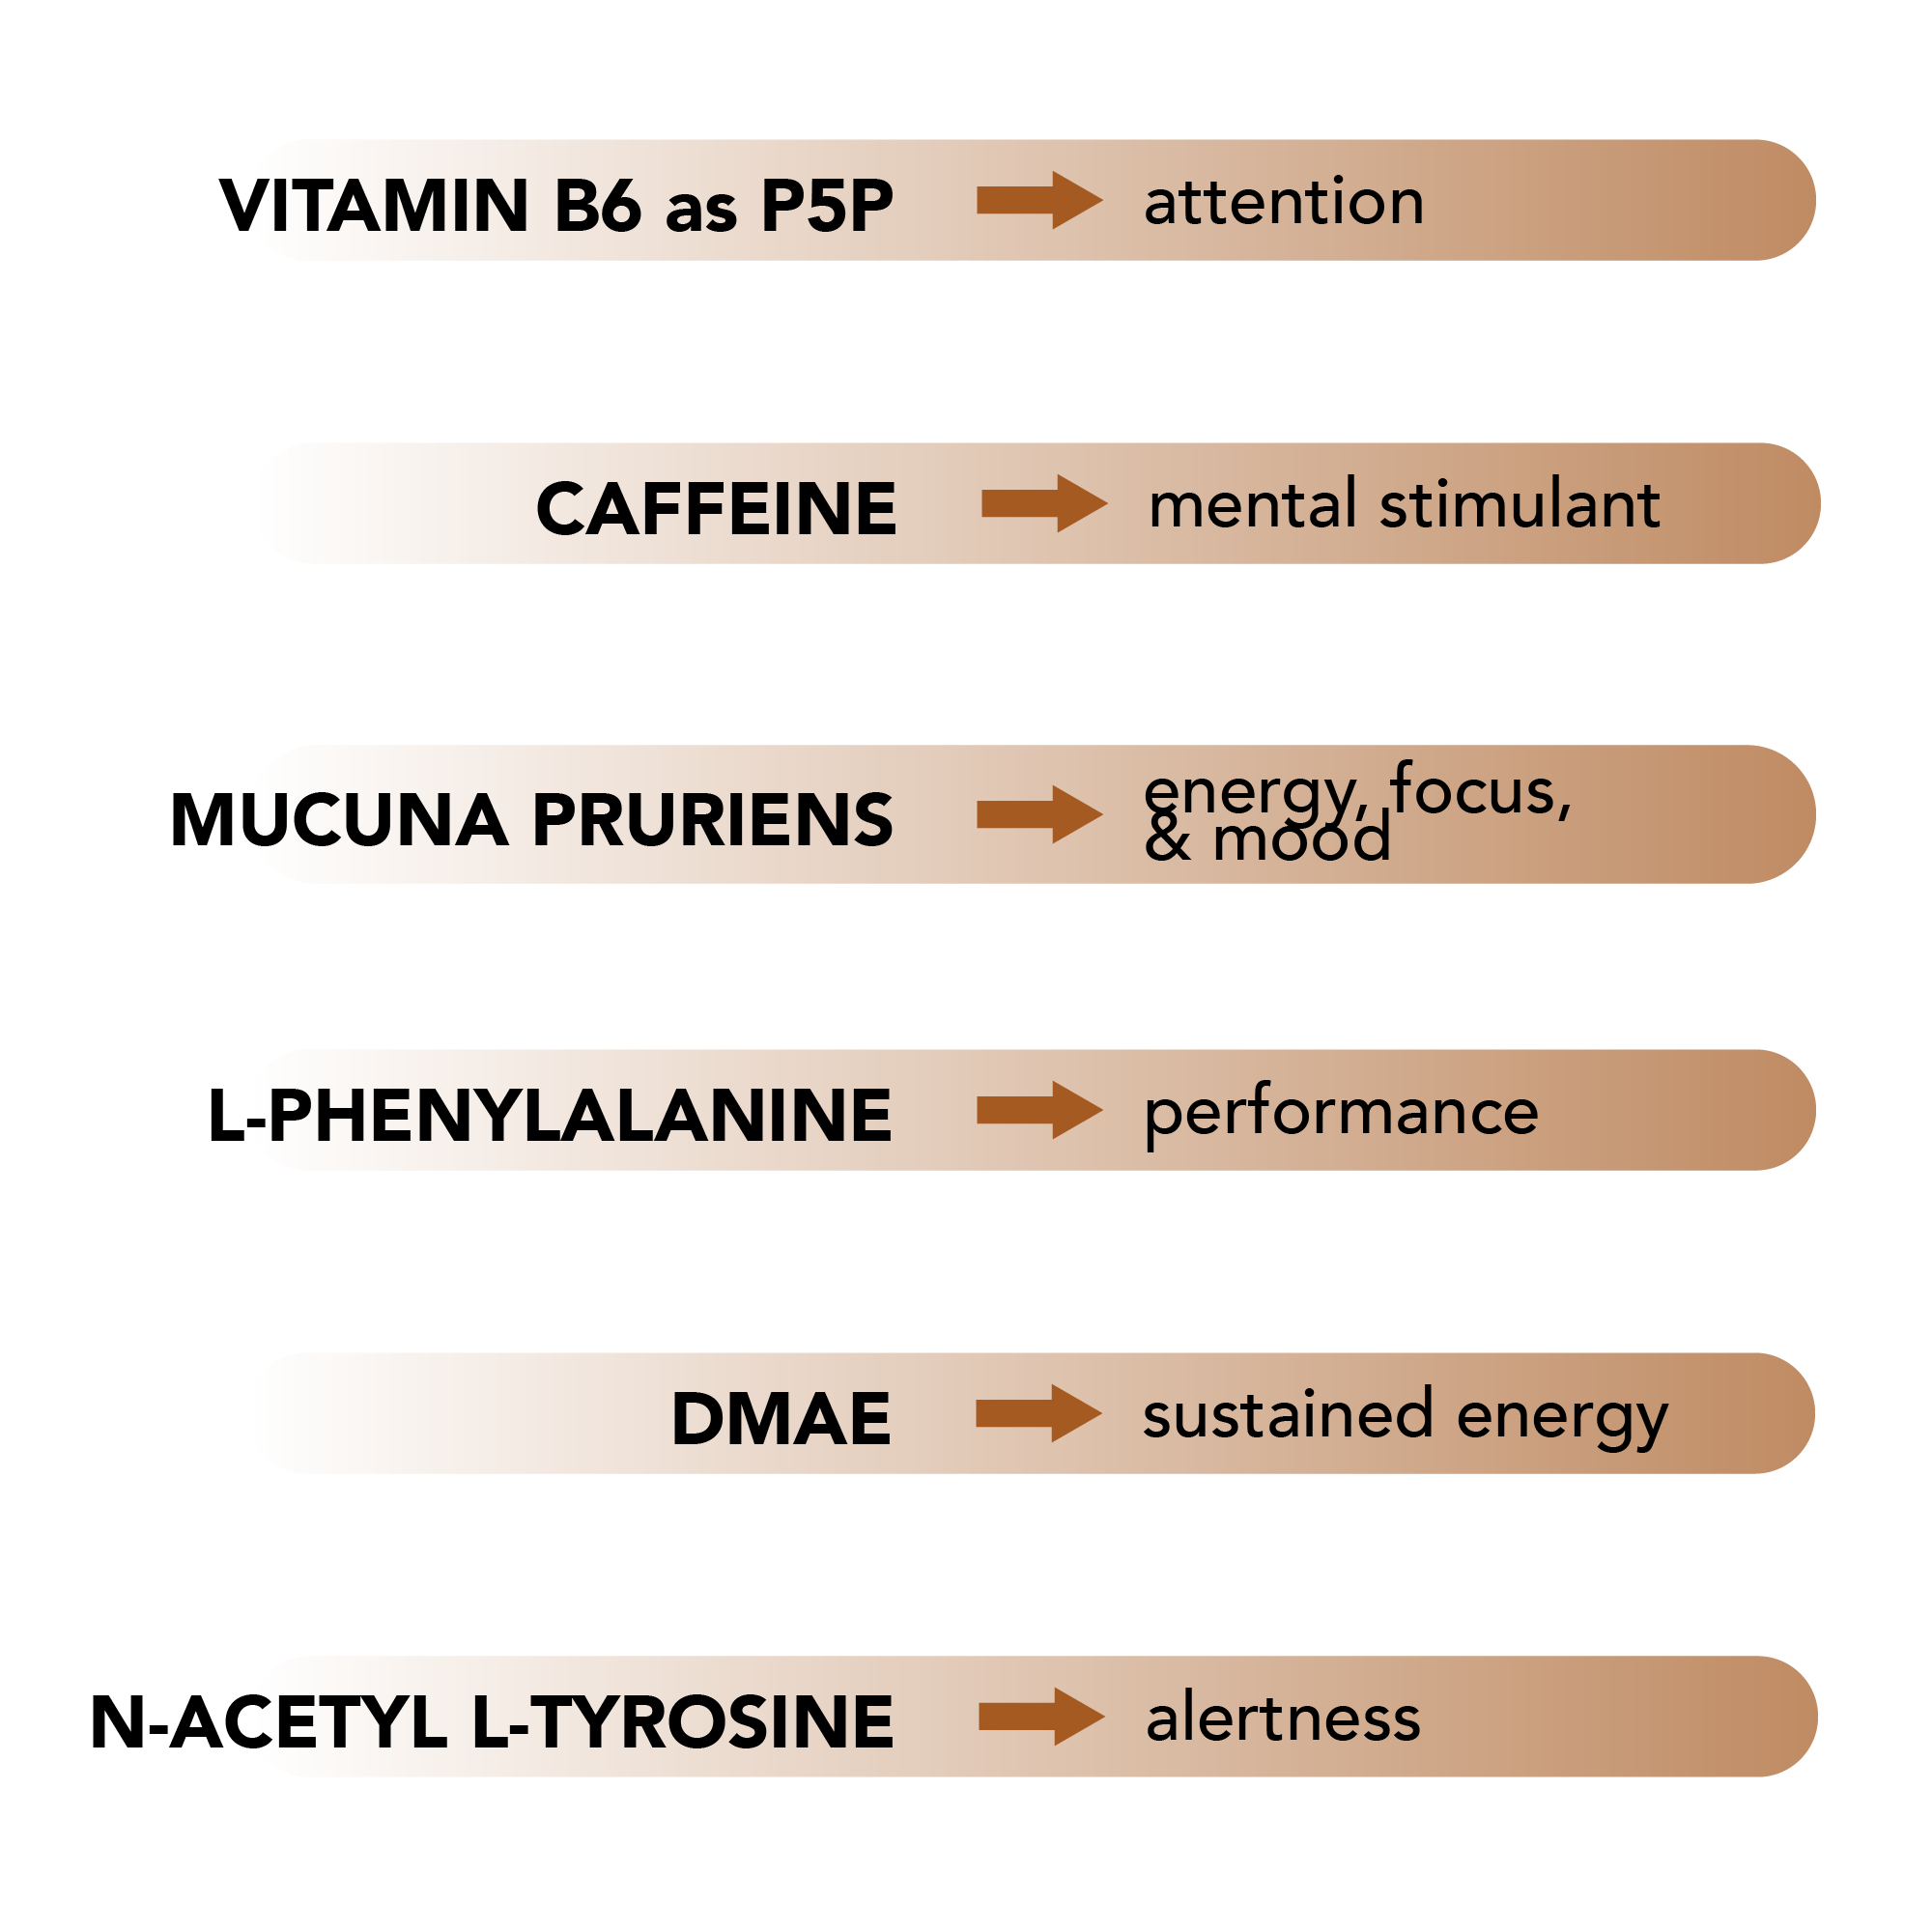 List of balancer/supplement ingredients and how they improve your mental and physical status. Vitamin B6 as P5P improves attention, Caffeine is a mental stimulant, Mucuna Pruriens improves energy, focus, and mood, Phenylalanine improves mental and physical performance, DMAE creates sustained energy, Acetyl L-Tyrosine improves alertness.